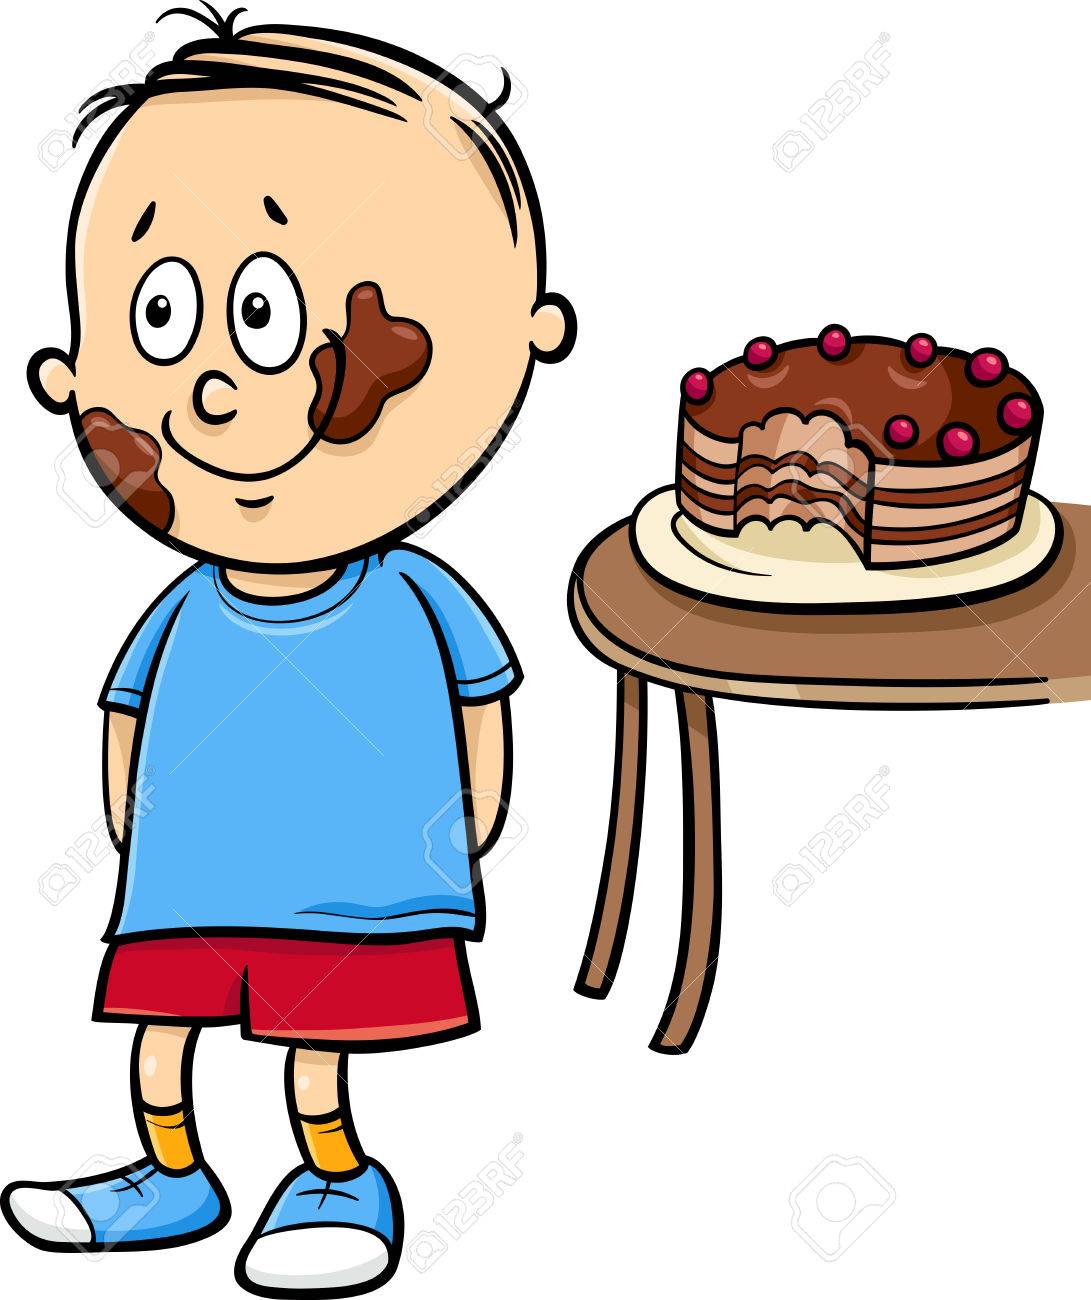 Clipart Eating Cake & Free Clip Art Images #29084.